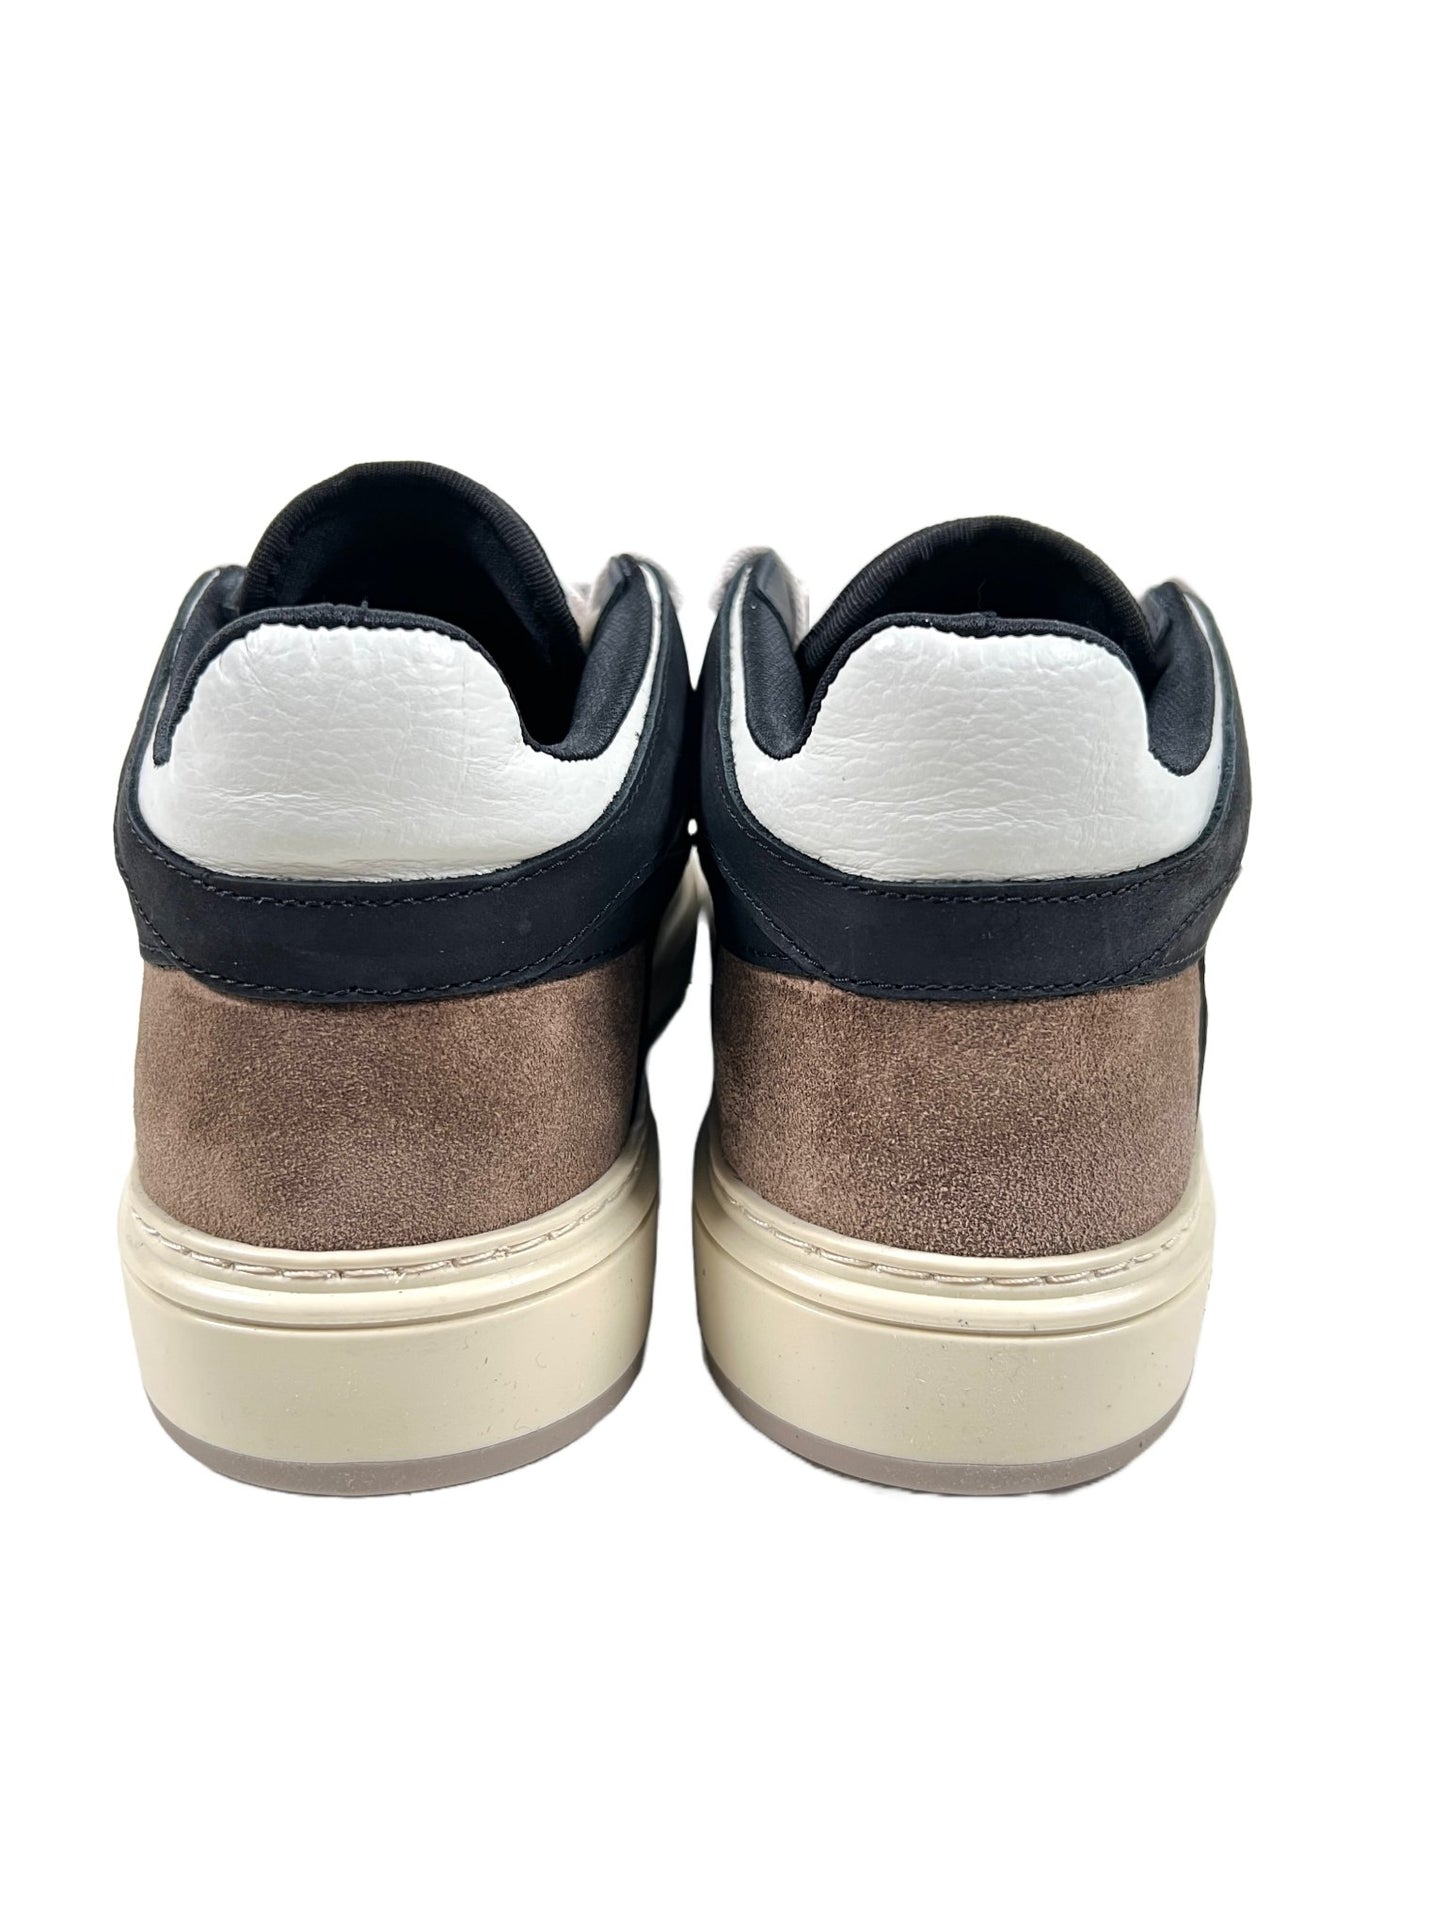 A pair of REPRESENT sneakers in Mushroom-Black color with white rubber soles.